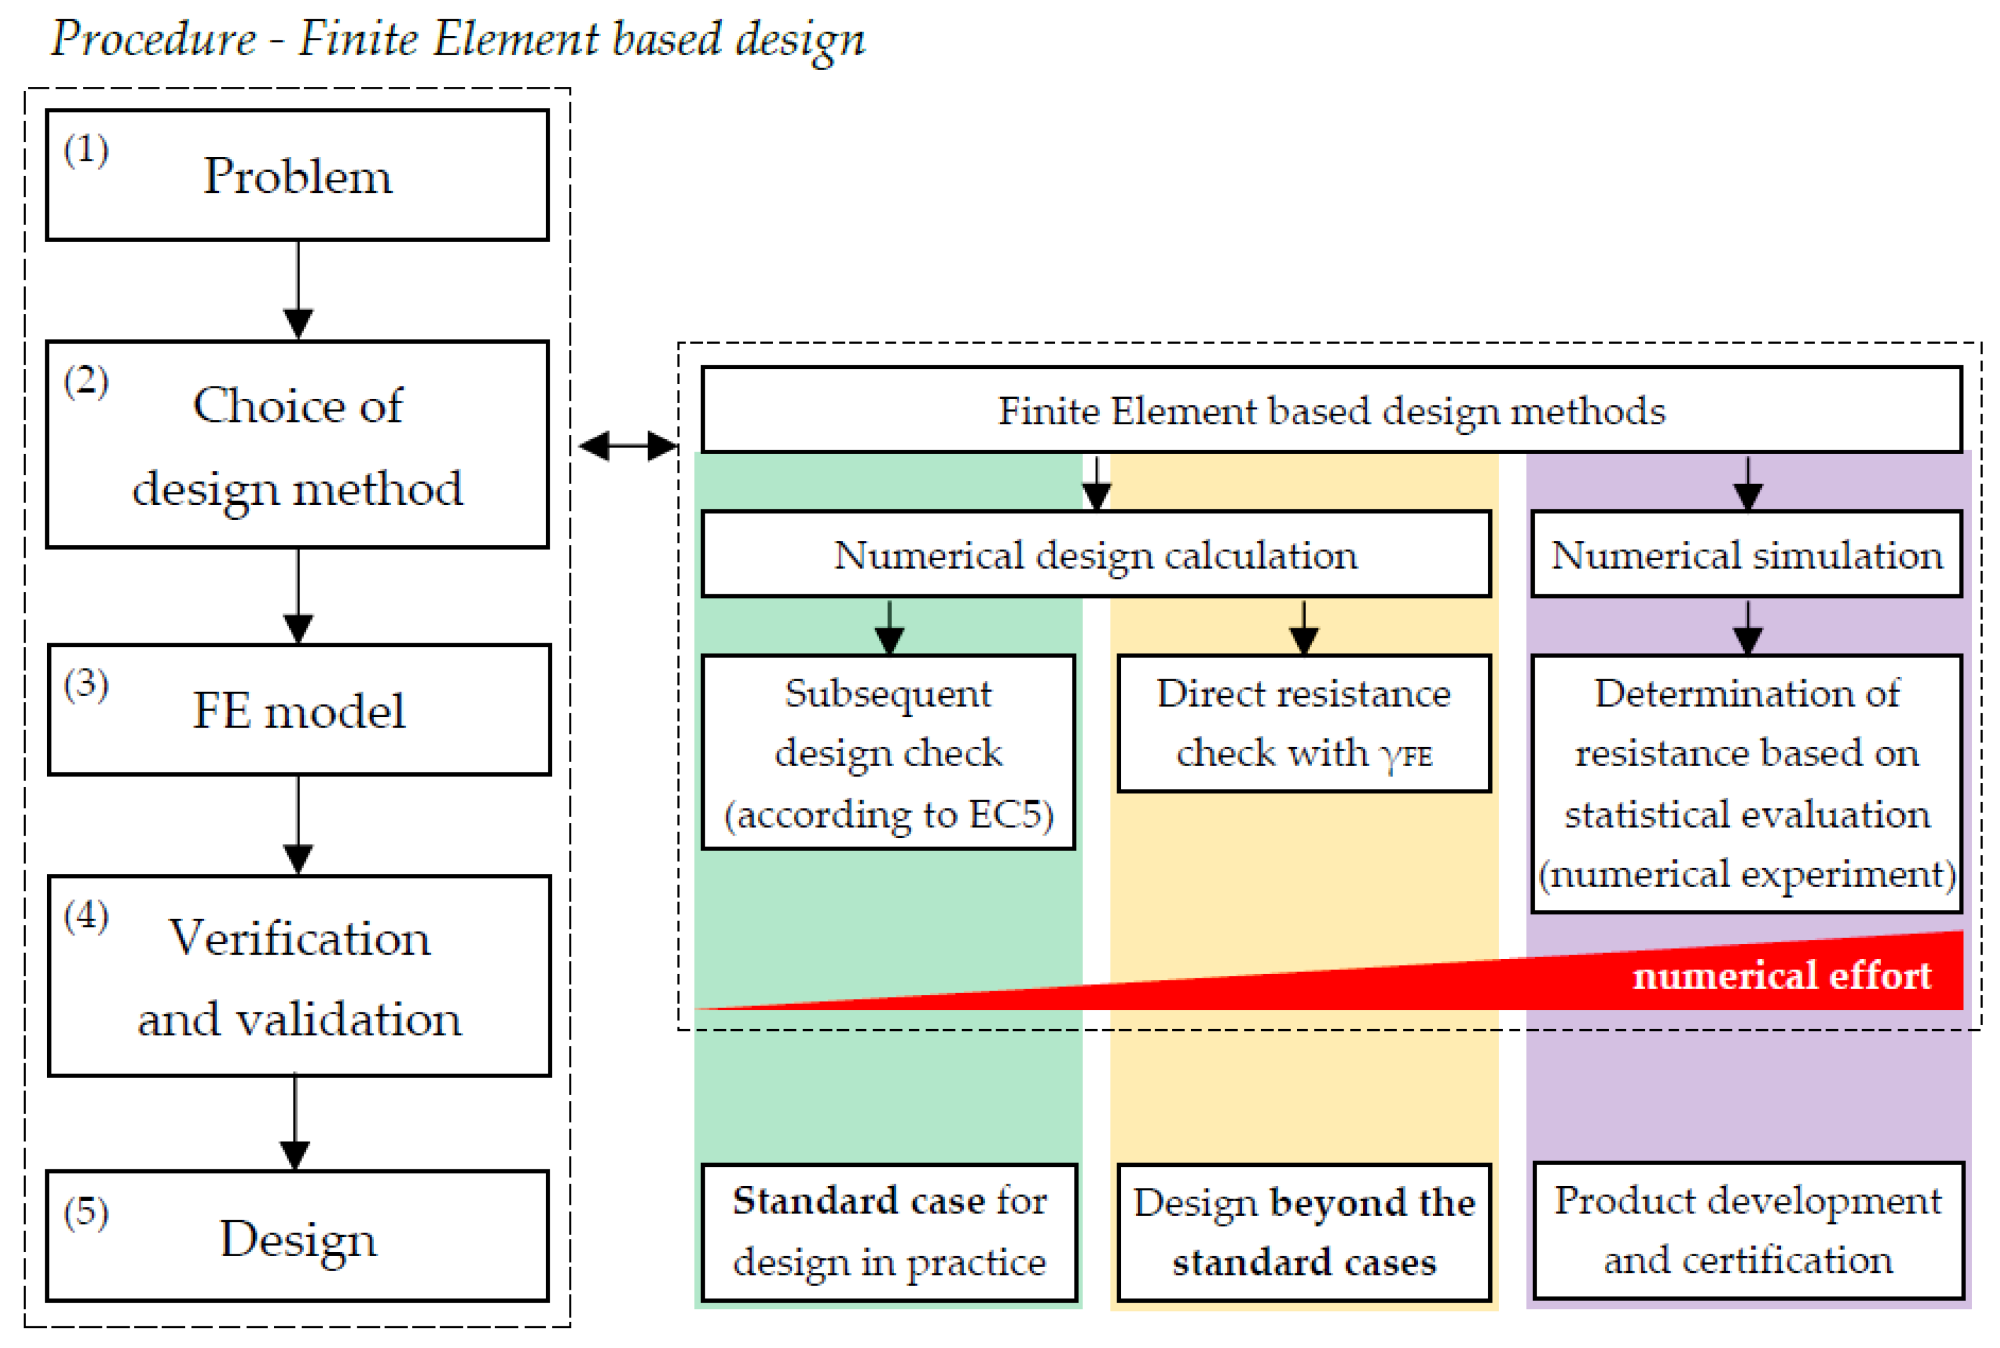 New Publication_Guidelines for a Finite Element Based Design of Timber Structures